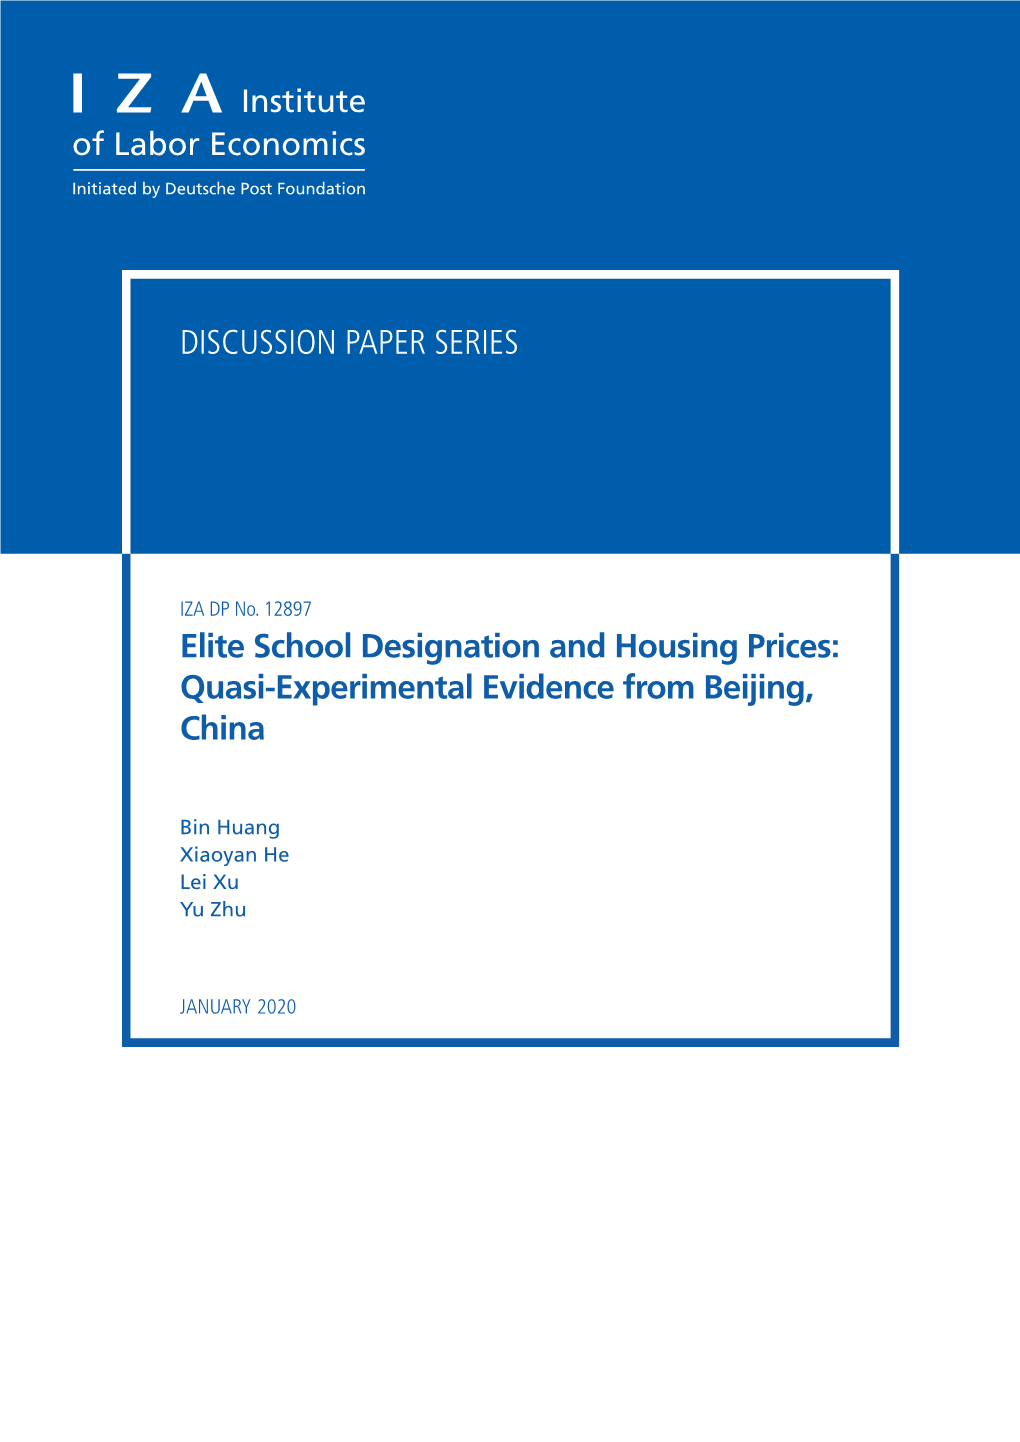 Elite School Designation and Housing Prices: Quasi-Experimental Evidence from Beijing, China